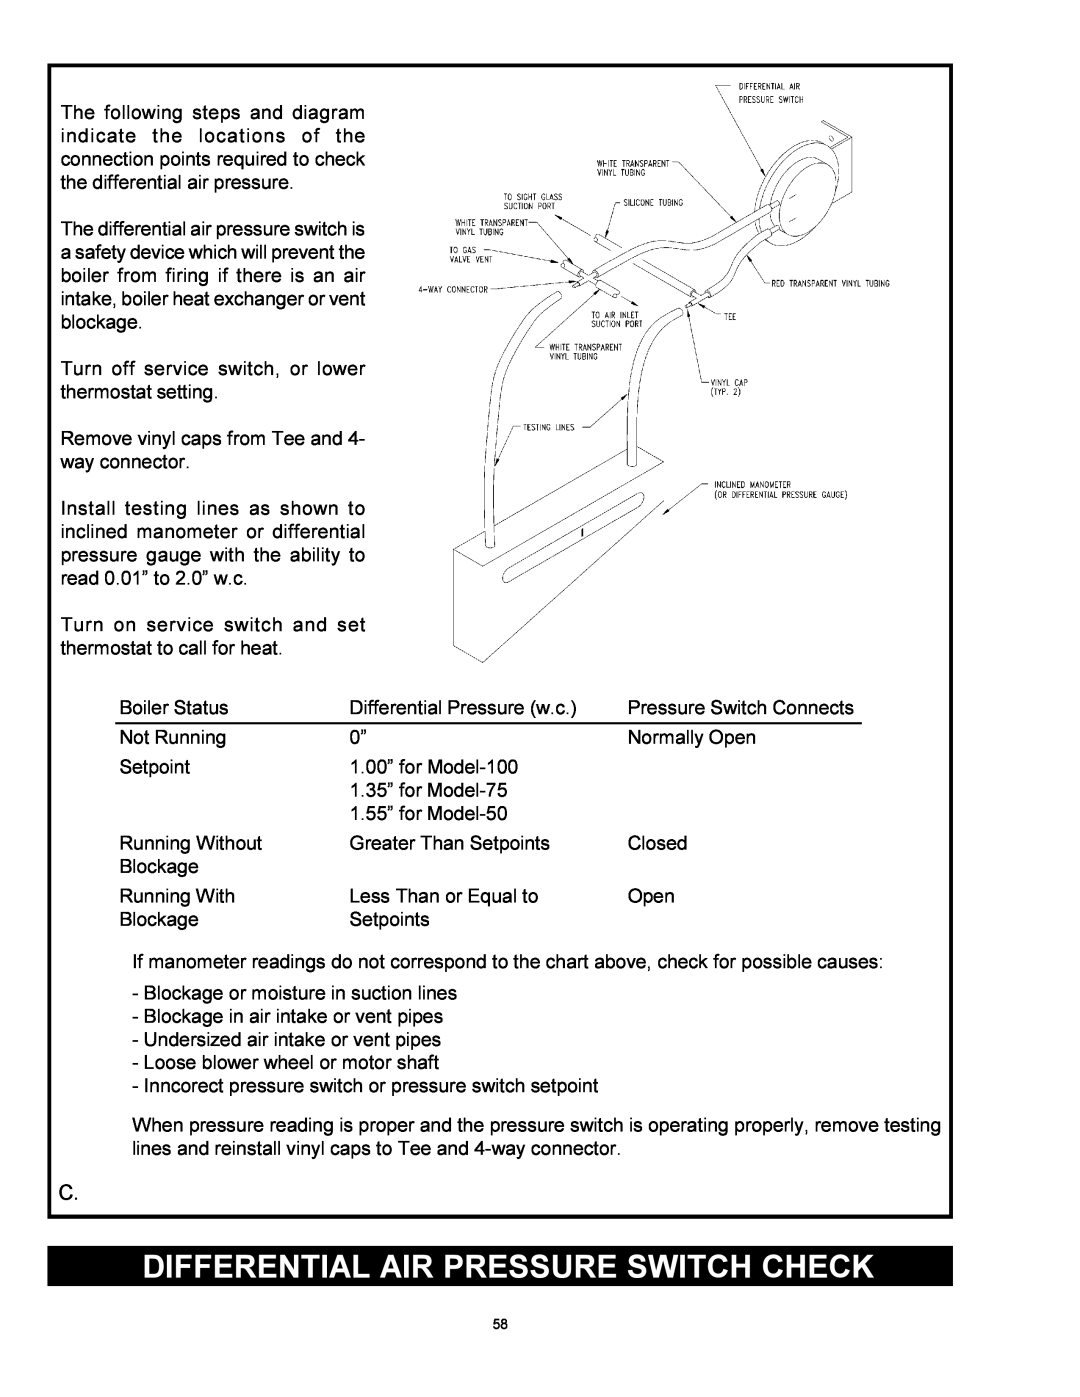 Quantum GAS-FIRED BOILERS installation instructions Differential Air Pressure Switch Check 